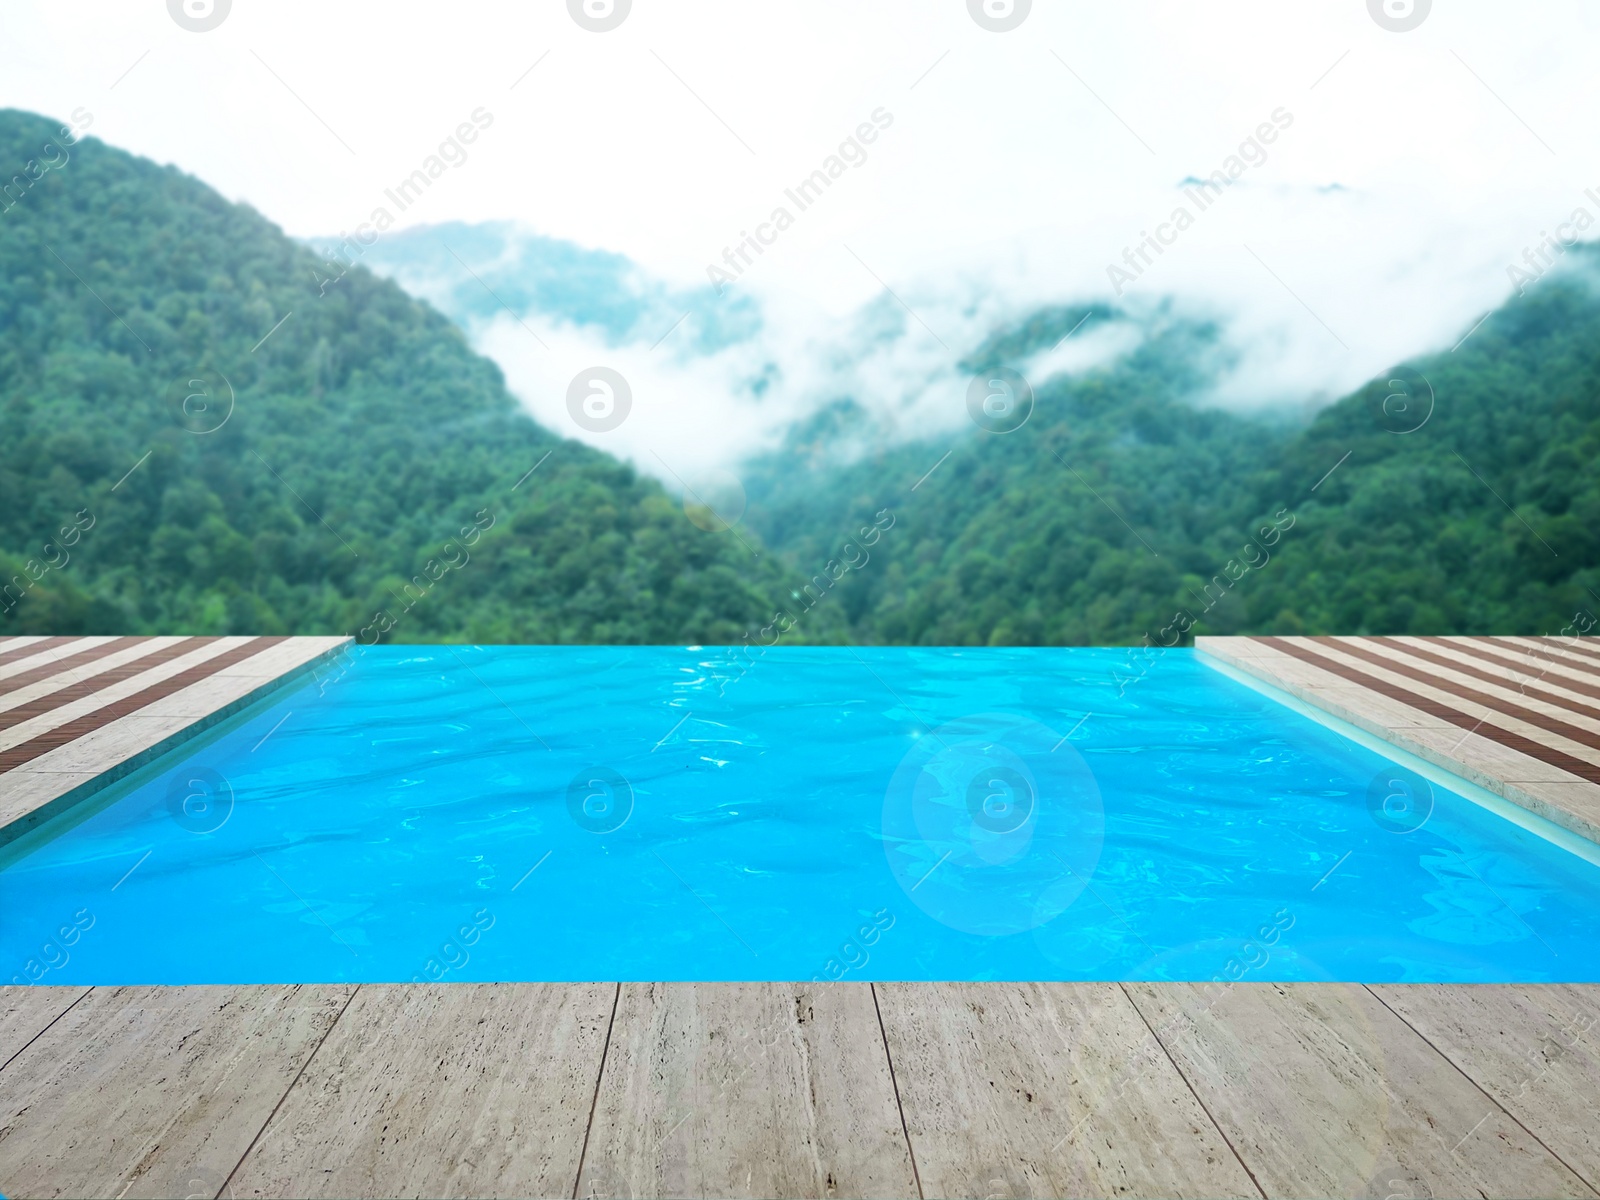 Image of Outdoor swimming pool at luxury resort with beautiful view of mountains